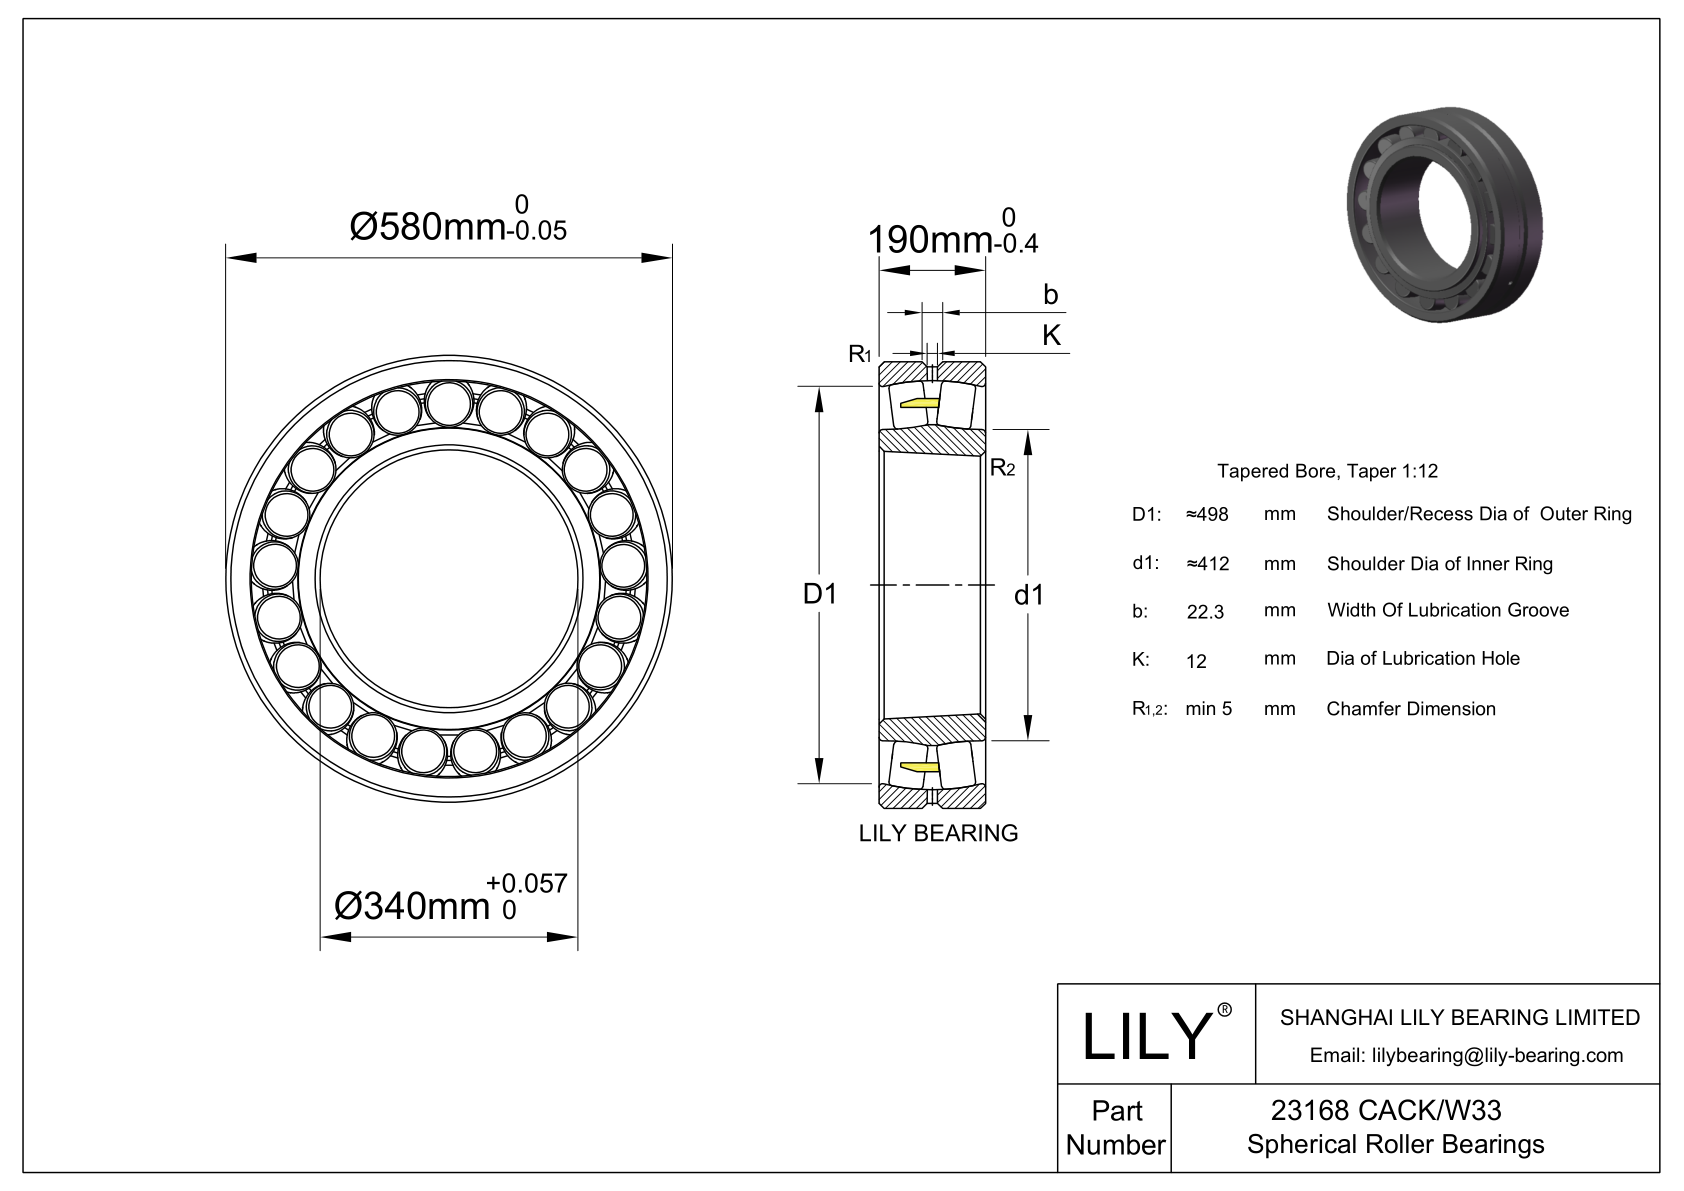 23168 CACK/W33 Double Row Spherical Roller Bearing cad drawing